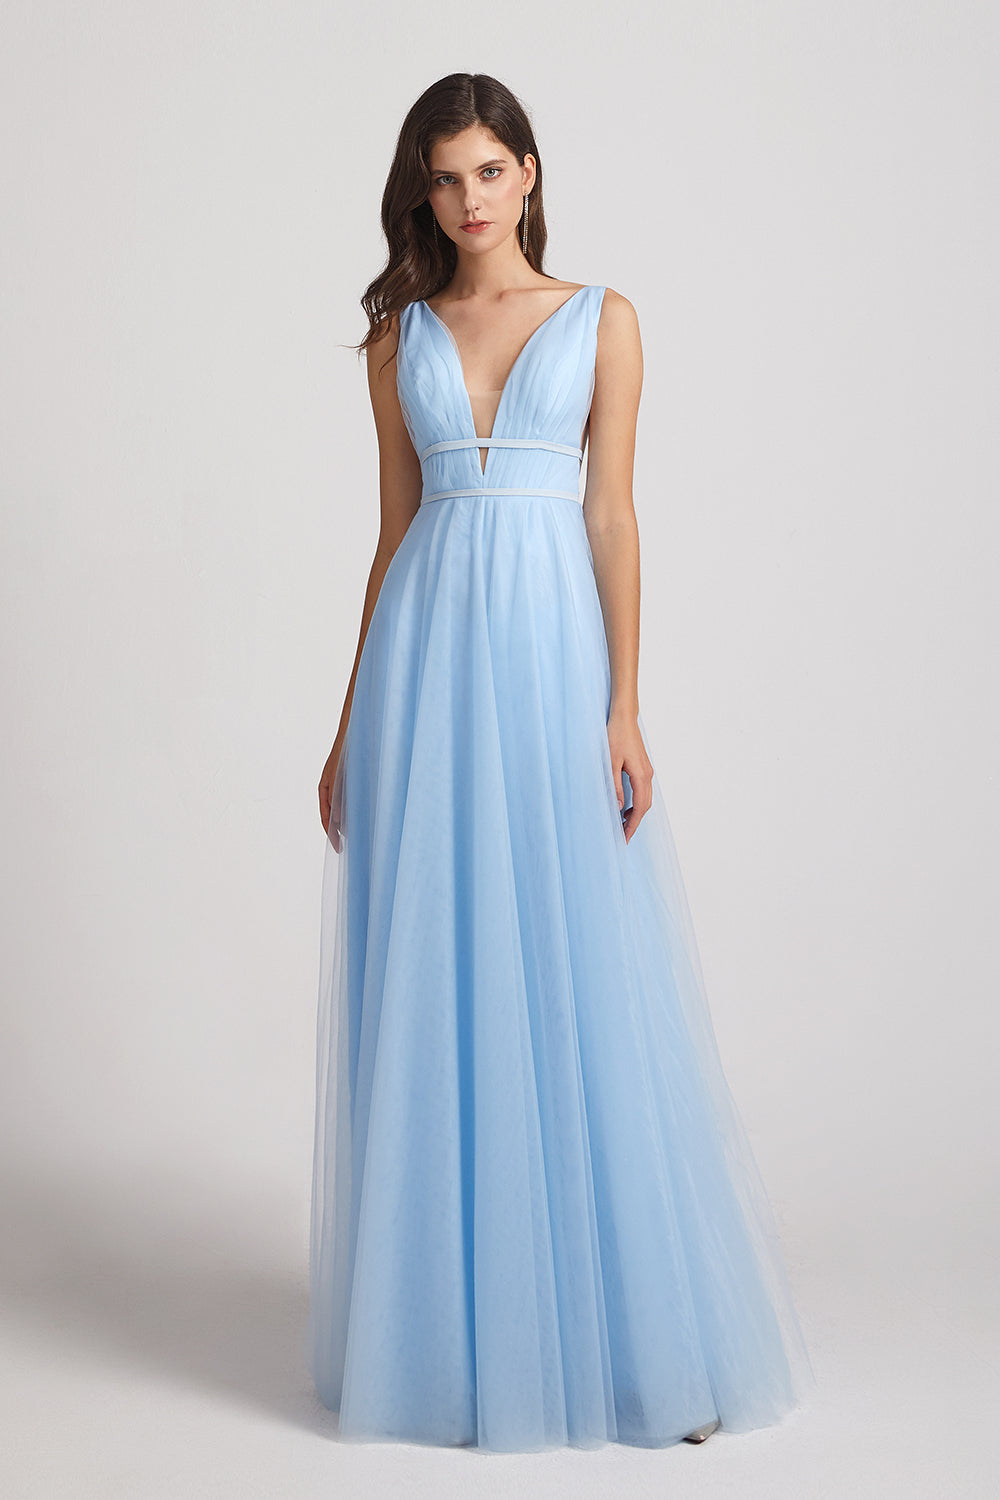 sleeveless a-line blue tulle bridesmaid gown